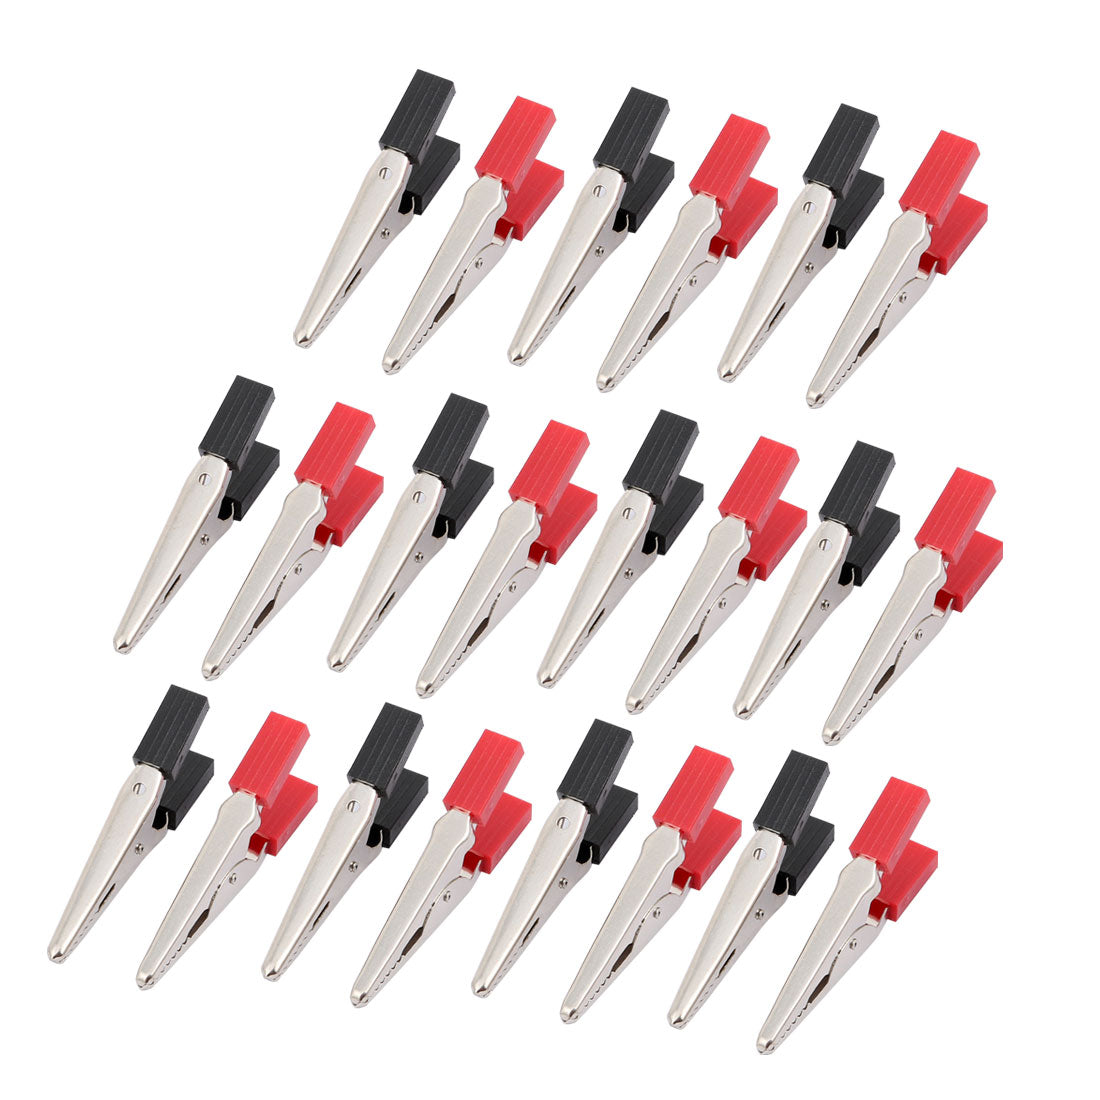 uxcell Uxcell 22pcs Insulated Crocodile Alligator Clips Clamps for Charge Cable Black Red